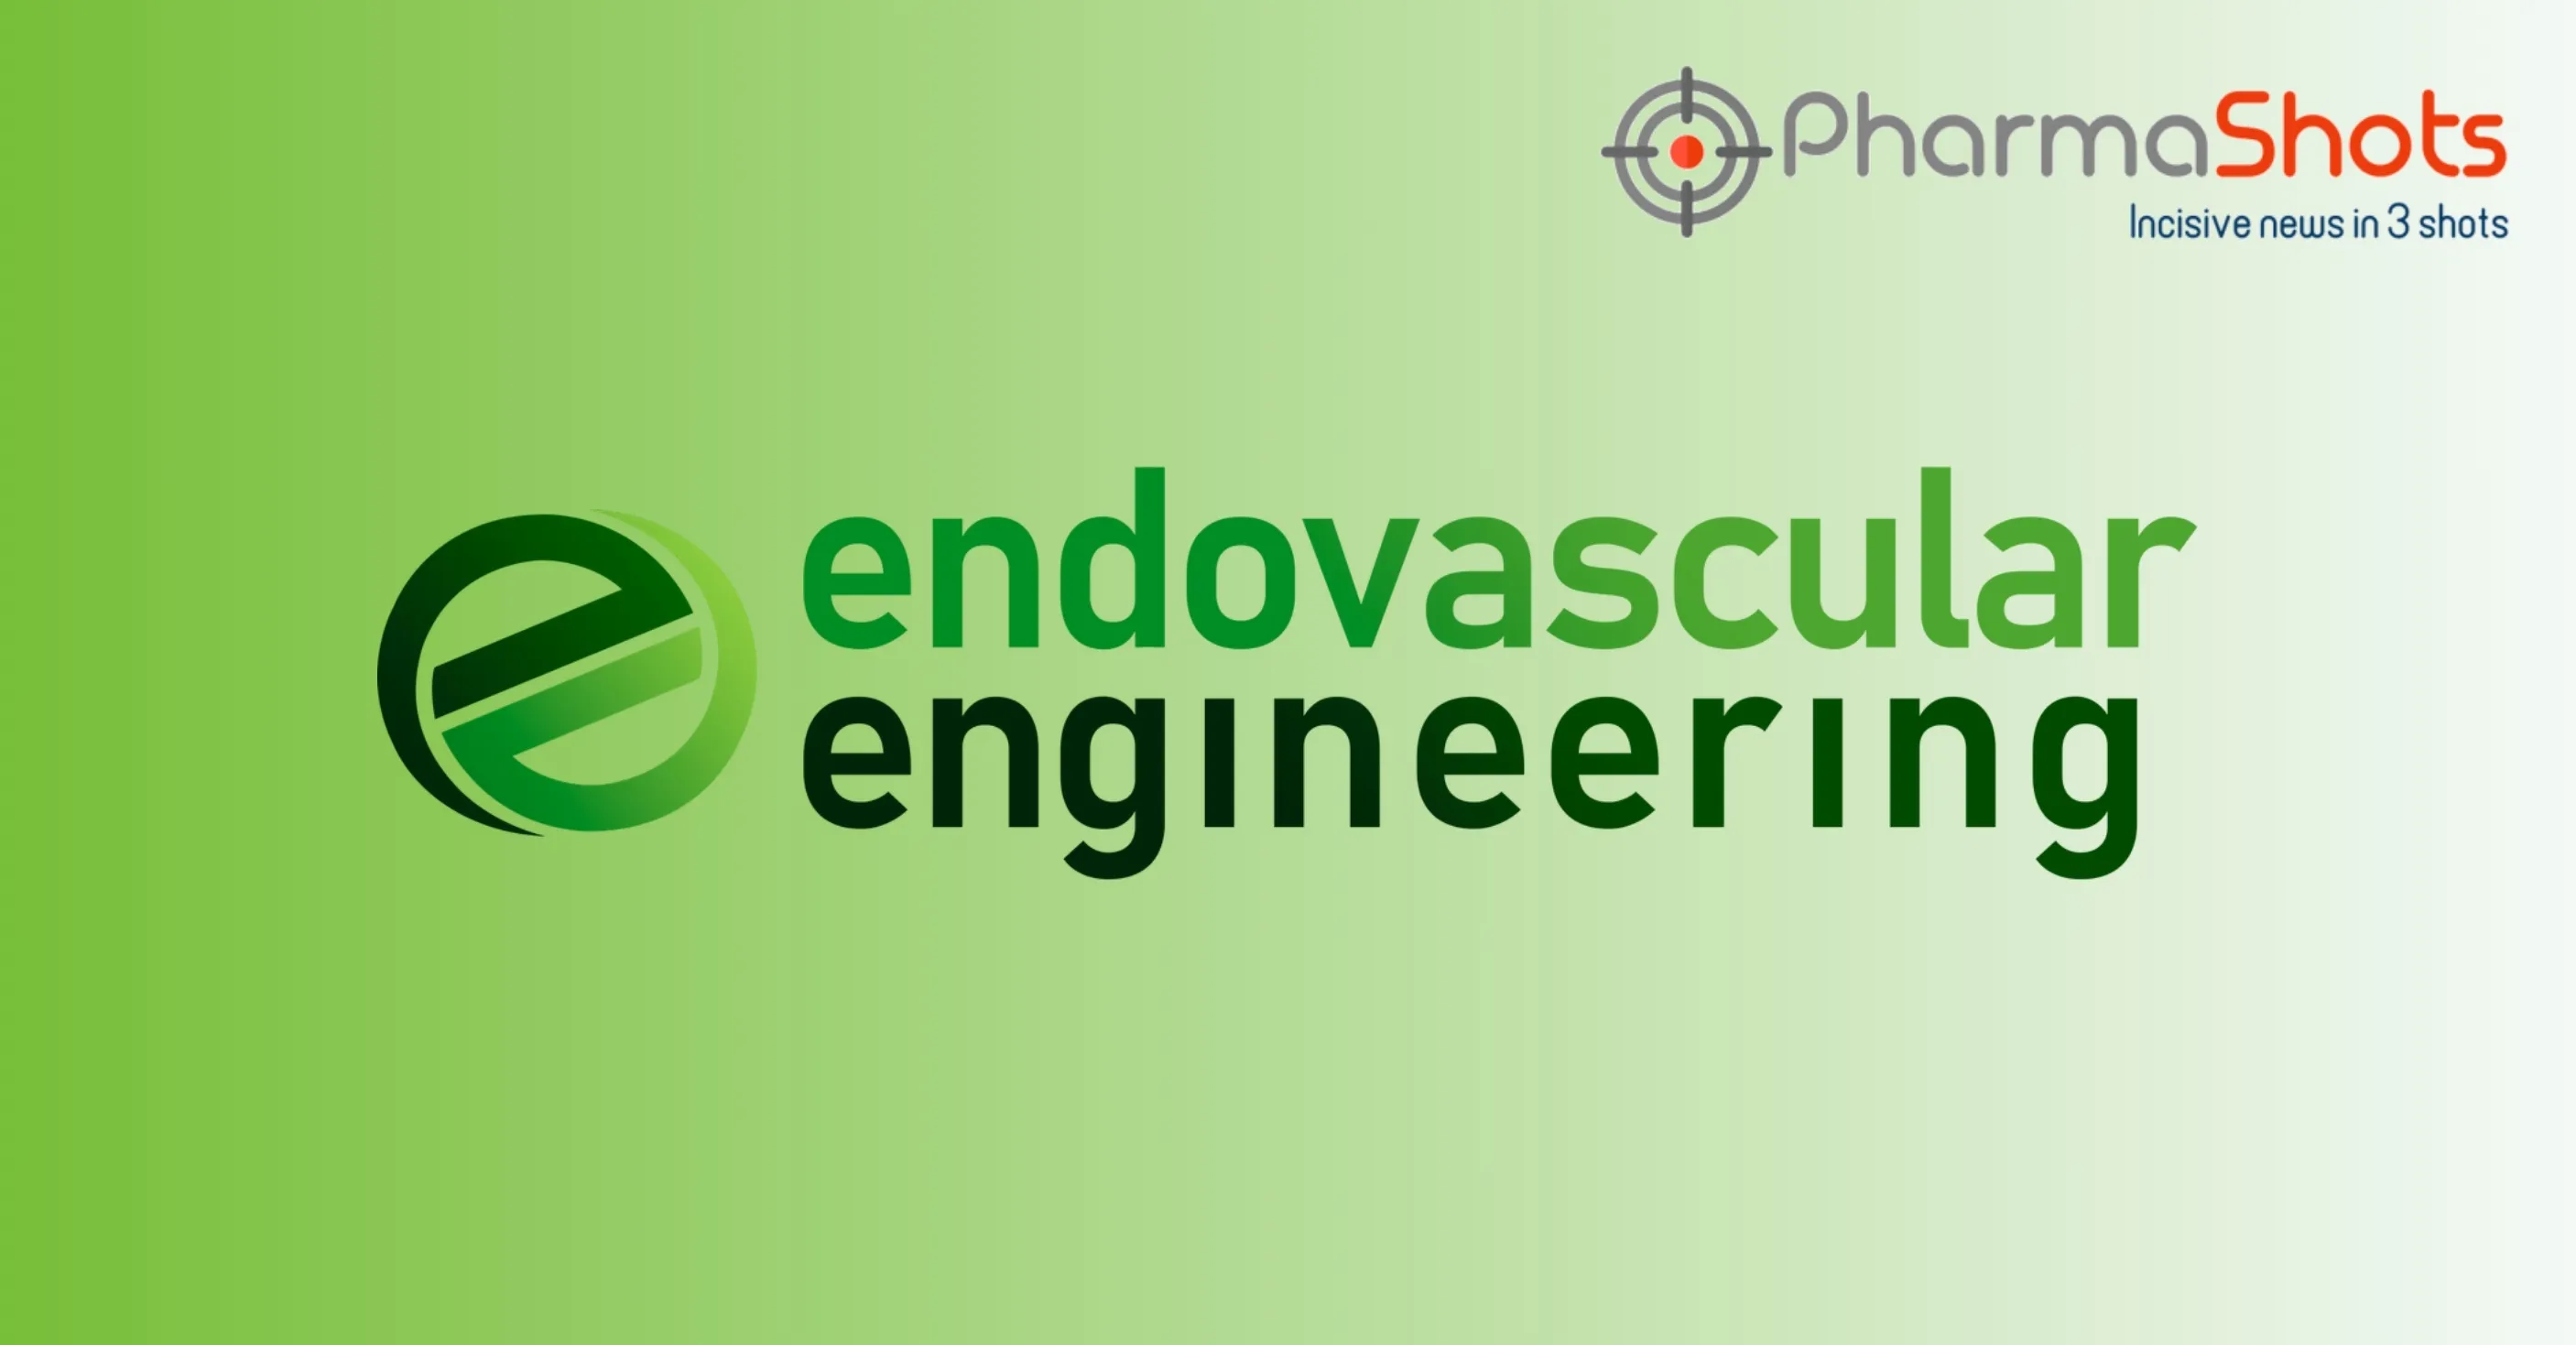 Endovascular Engineering Obtains IDE Approval from the US FDA for its Hēlo Thrombectomy System to Treat Pulmonary Embolism